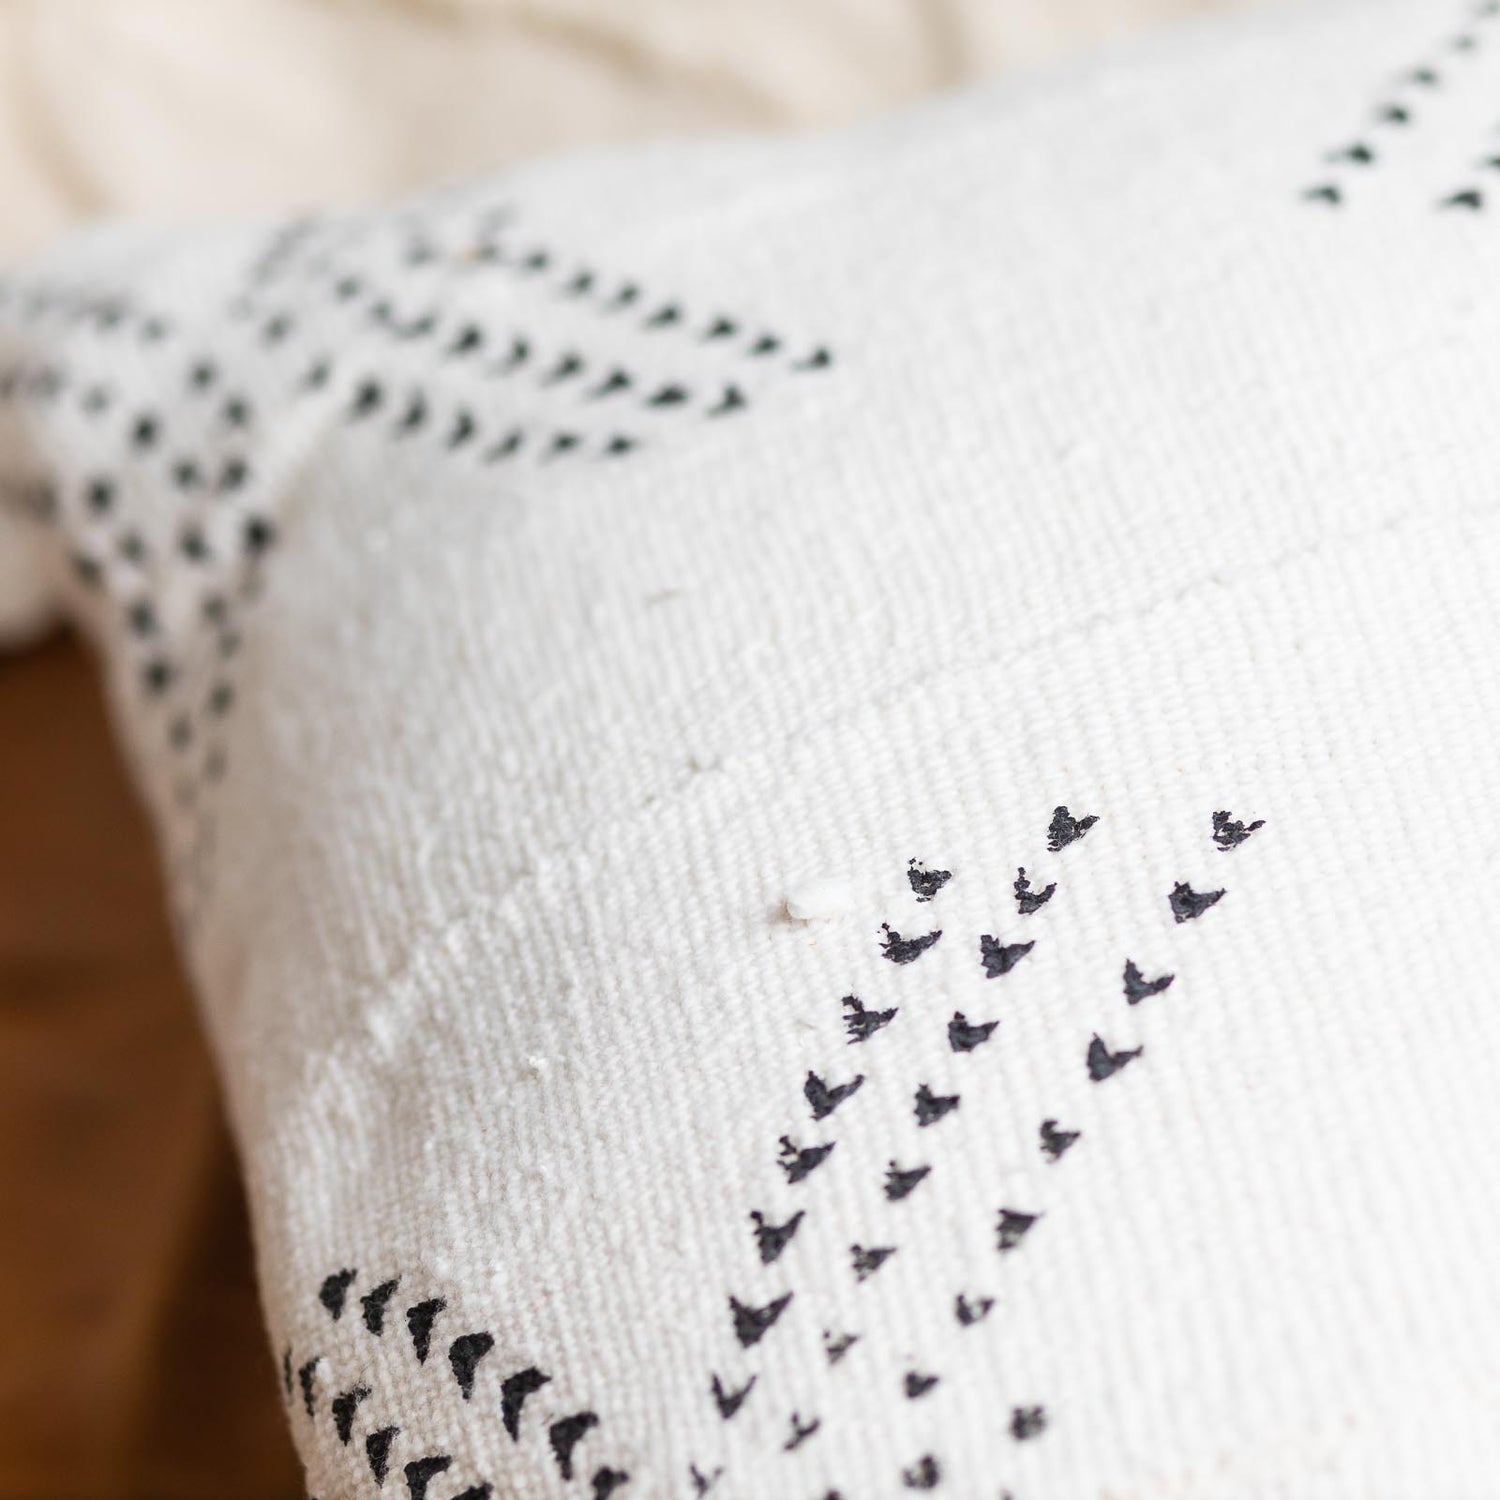 Mud Cloth Square Pillow, White with Tracks